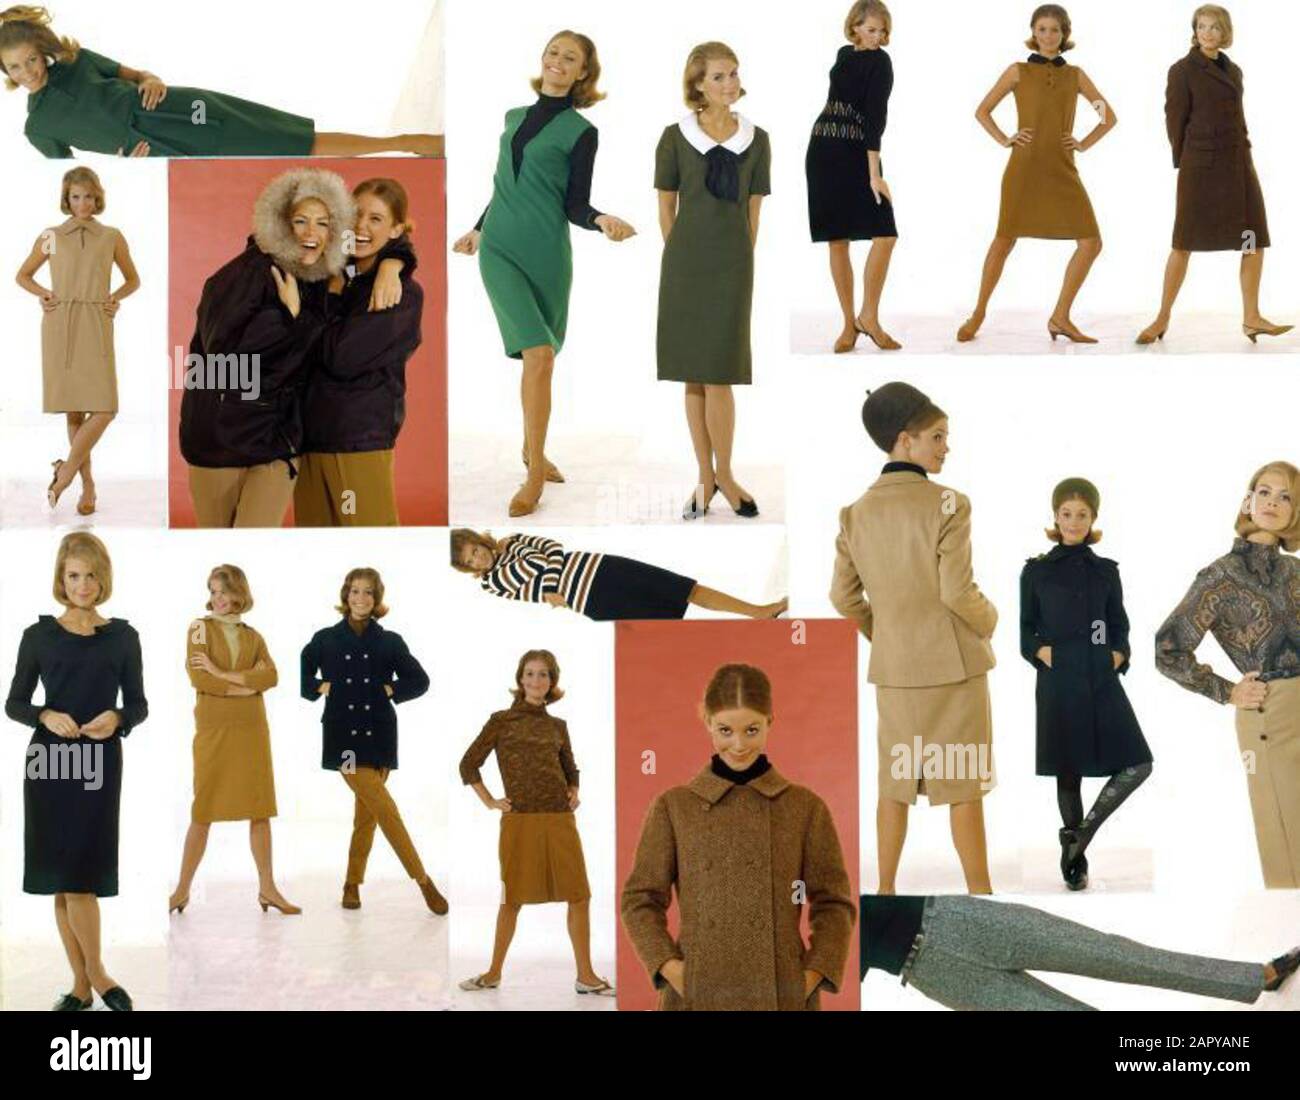 Women's fashion. Autumn fashion 1964 for teens and twens: dresses, dresses, jackets and trousers from the collections of the Bijenkorf, C & A, V & D, Voss and Witteveen. The Netherlands, 1964. Stock Photo